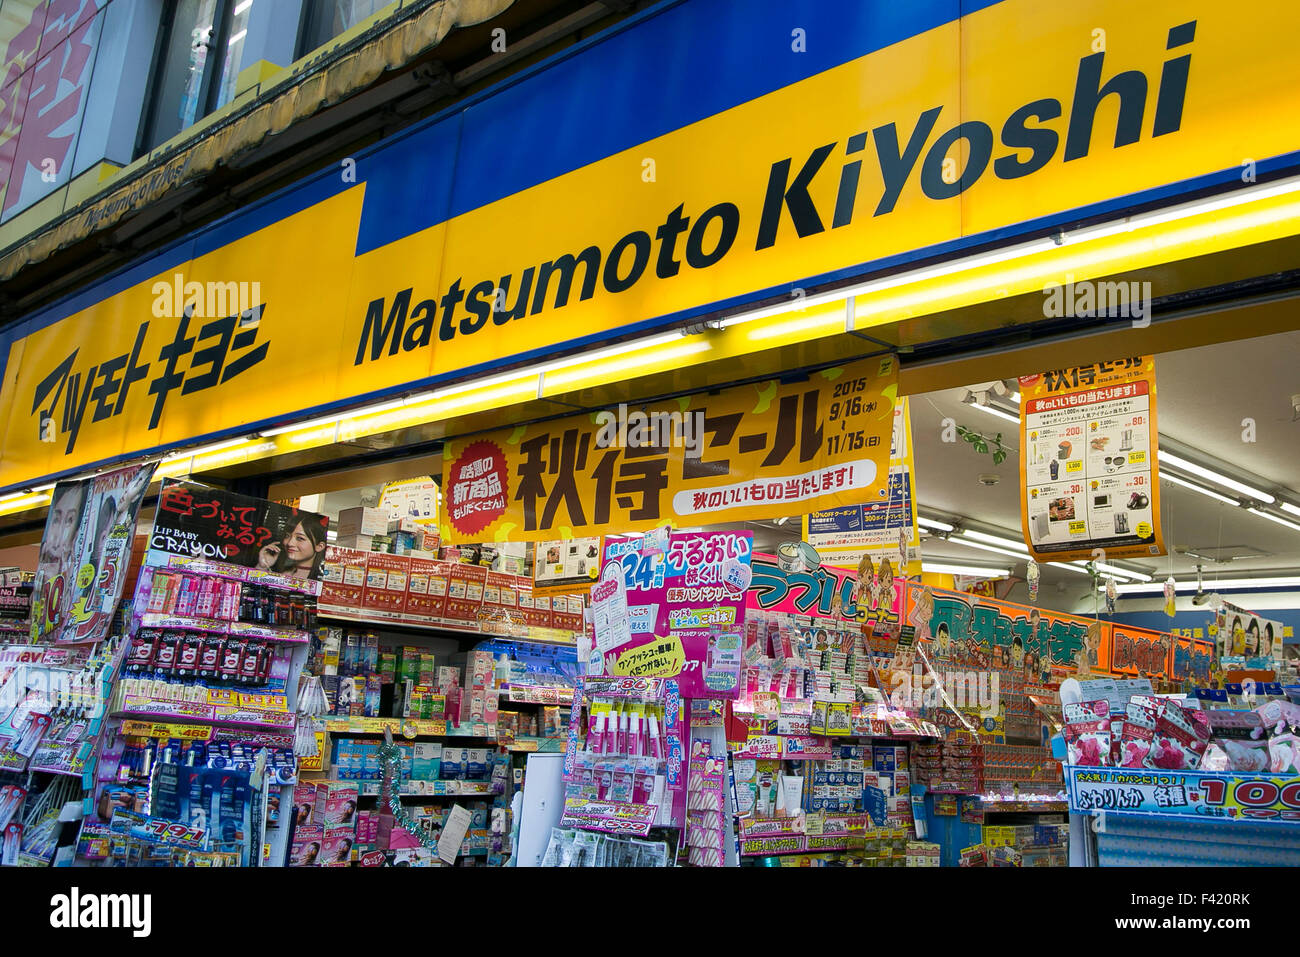 Matsumoto Kiyoshi signboard on display at the entrance of its drugstore in Yurakucho on October 14, 2015, Tokyo, Japan. Matsumoto Kiyoshi is Japan's biggest pharmacy chain selling low price cosmetics and medicine. It was founded in 1932 and claims to serve over 16% of the Japanese population. © Rodrigo Reyes Marin/AFLO/Alamy Live News Stock Photo